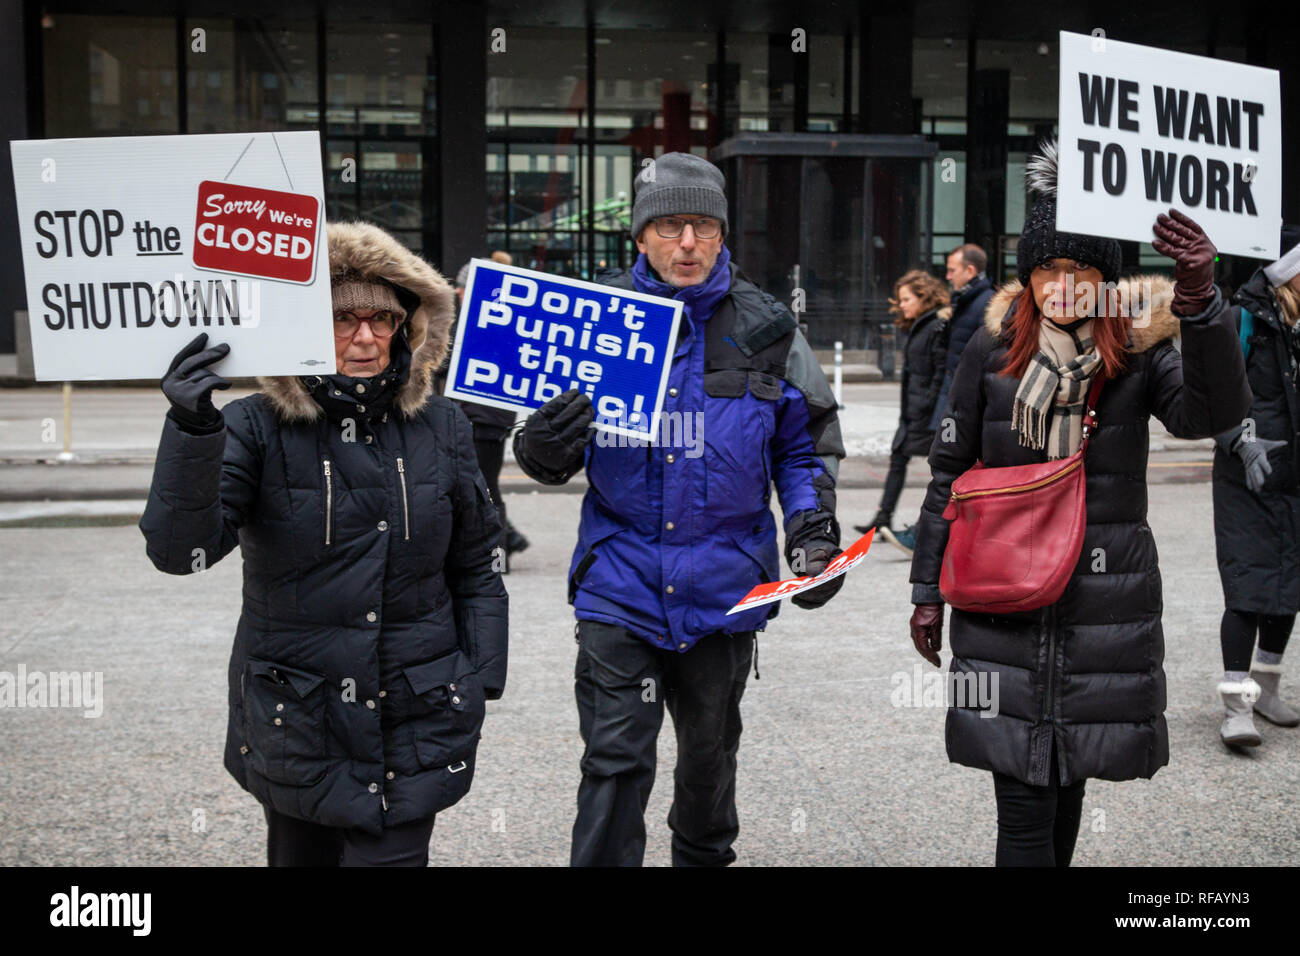 Chicago, Illinois, USA. 24th January, 2019. For the third time in just over two weeks furloughed government workers gathered at noon under the Calder Flamingo in Chicago' s frigid Federal Plaza and demanded that congress and President Trump put an end to the government shut down. While a light snow began to fall, and after listening to speeches of support from union leaders representing the AFGE, the NTEU and other concerned organizations, the effected workers marched around the plaza with their signs. Credit: Matthew Kaplan/Alamy Live News Stock Photo